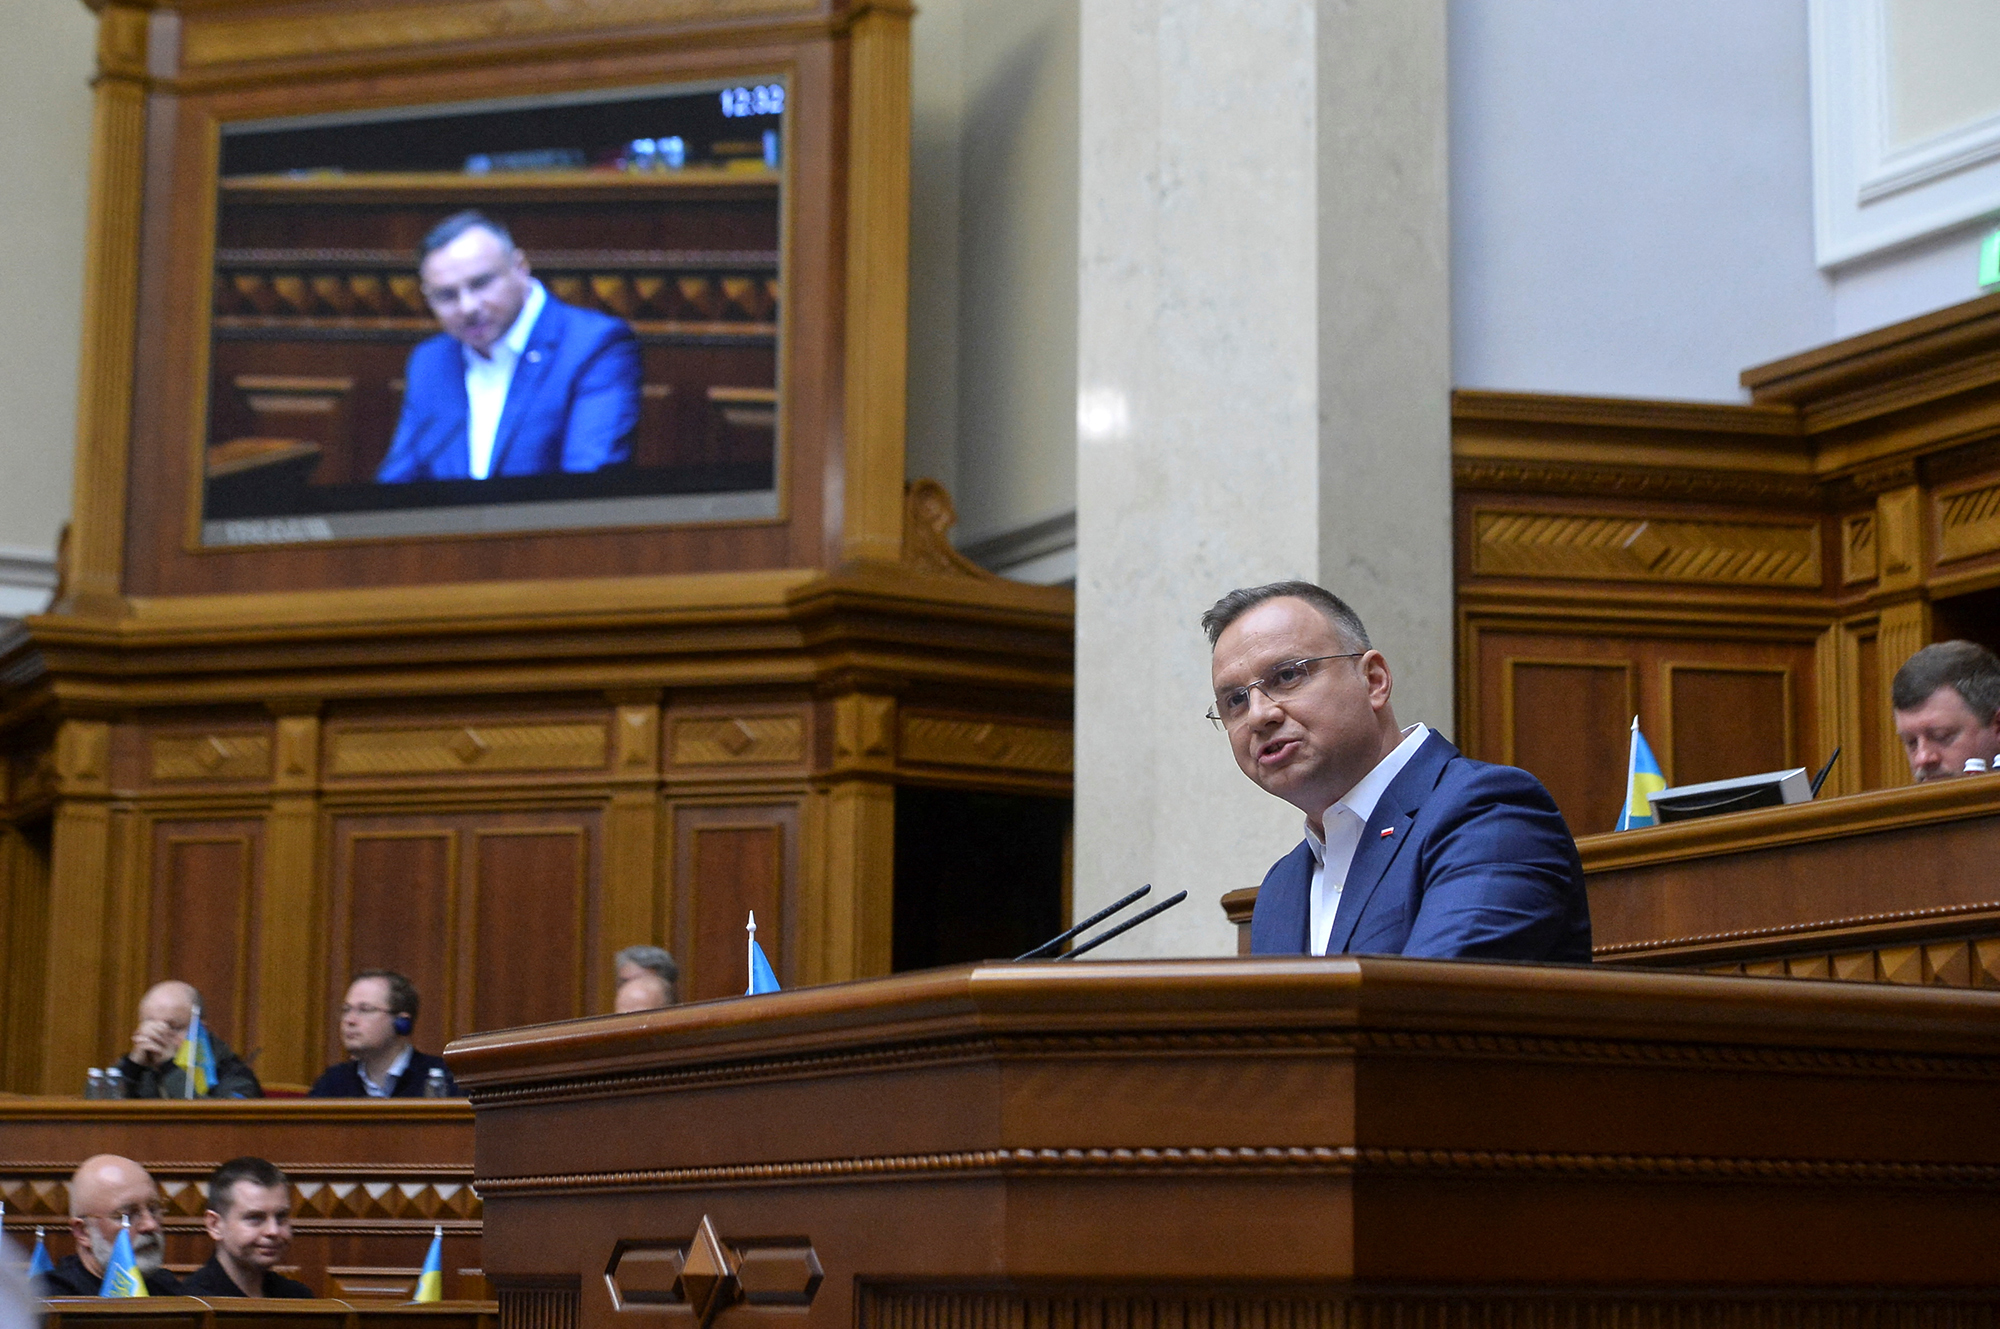 Polish President Andrzej Duda addresses lawmakers during a Ukrainian parliament session in Kyiv on May 22. 